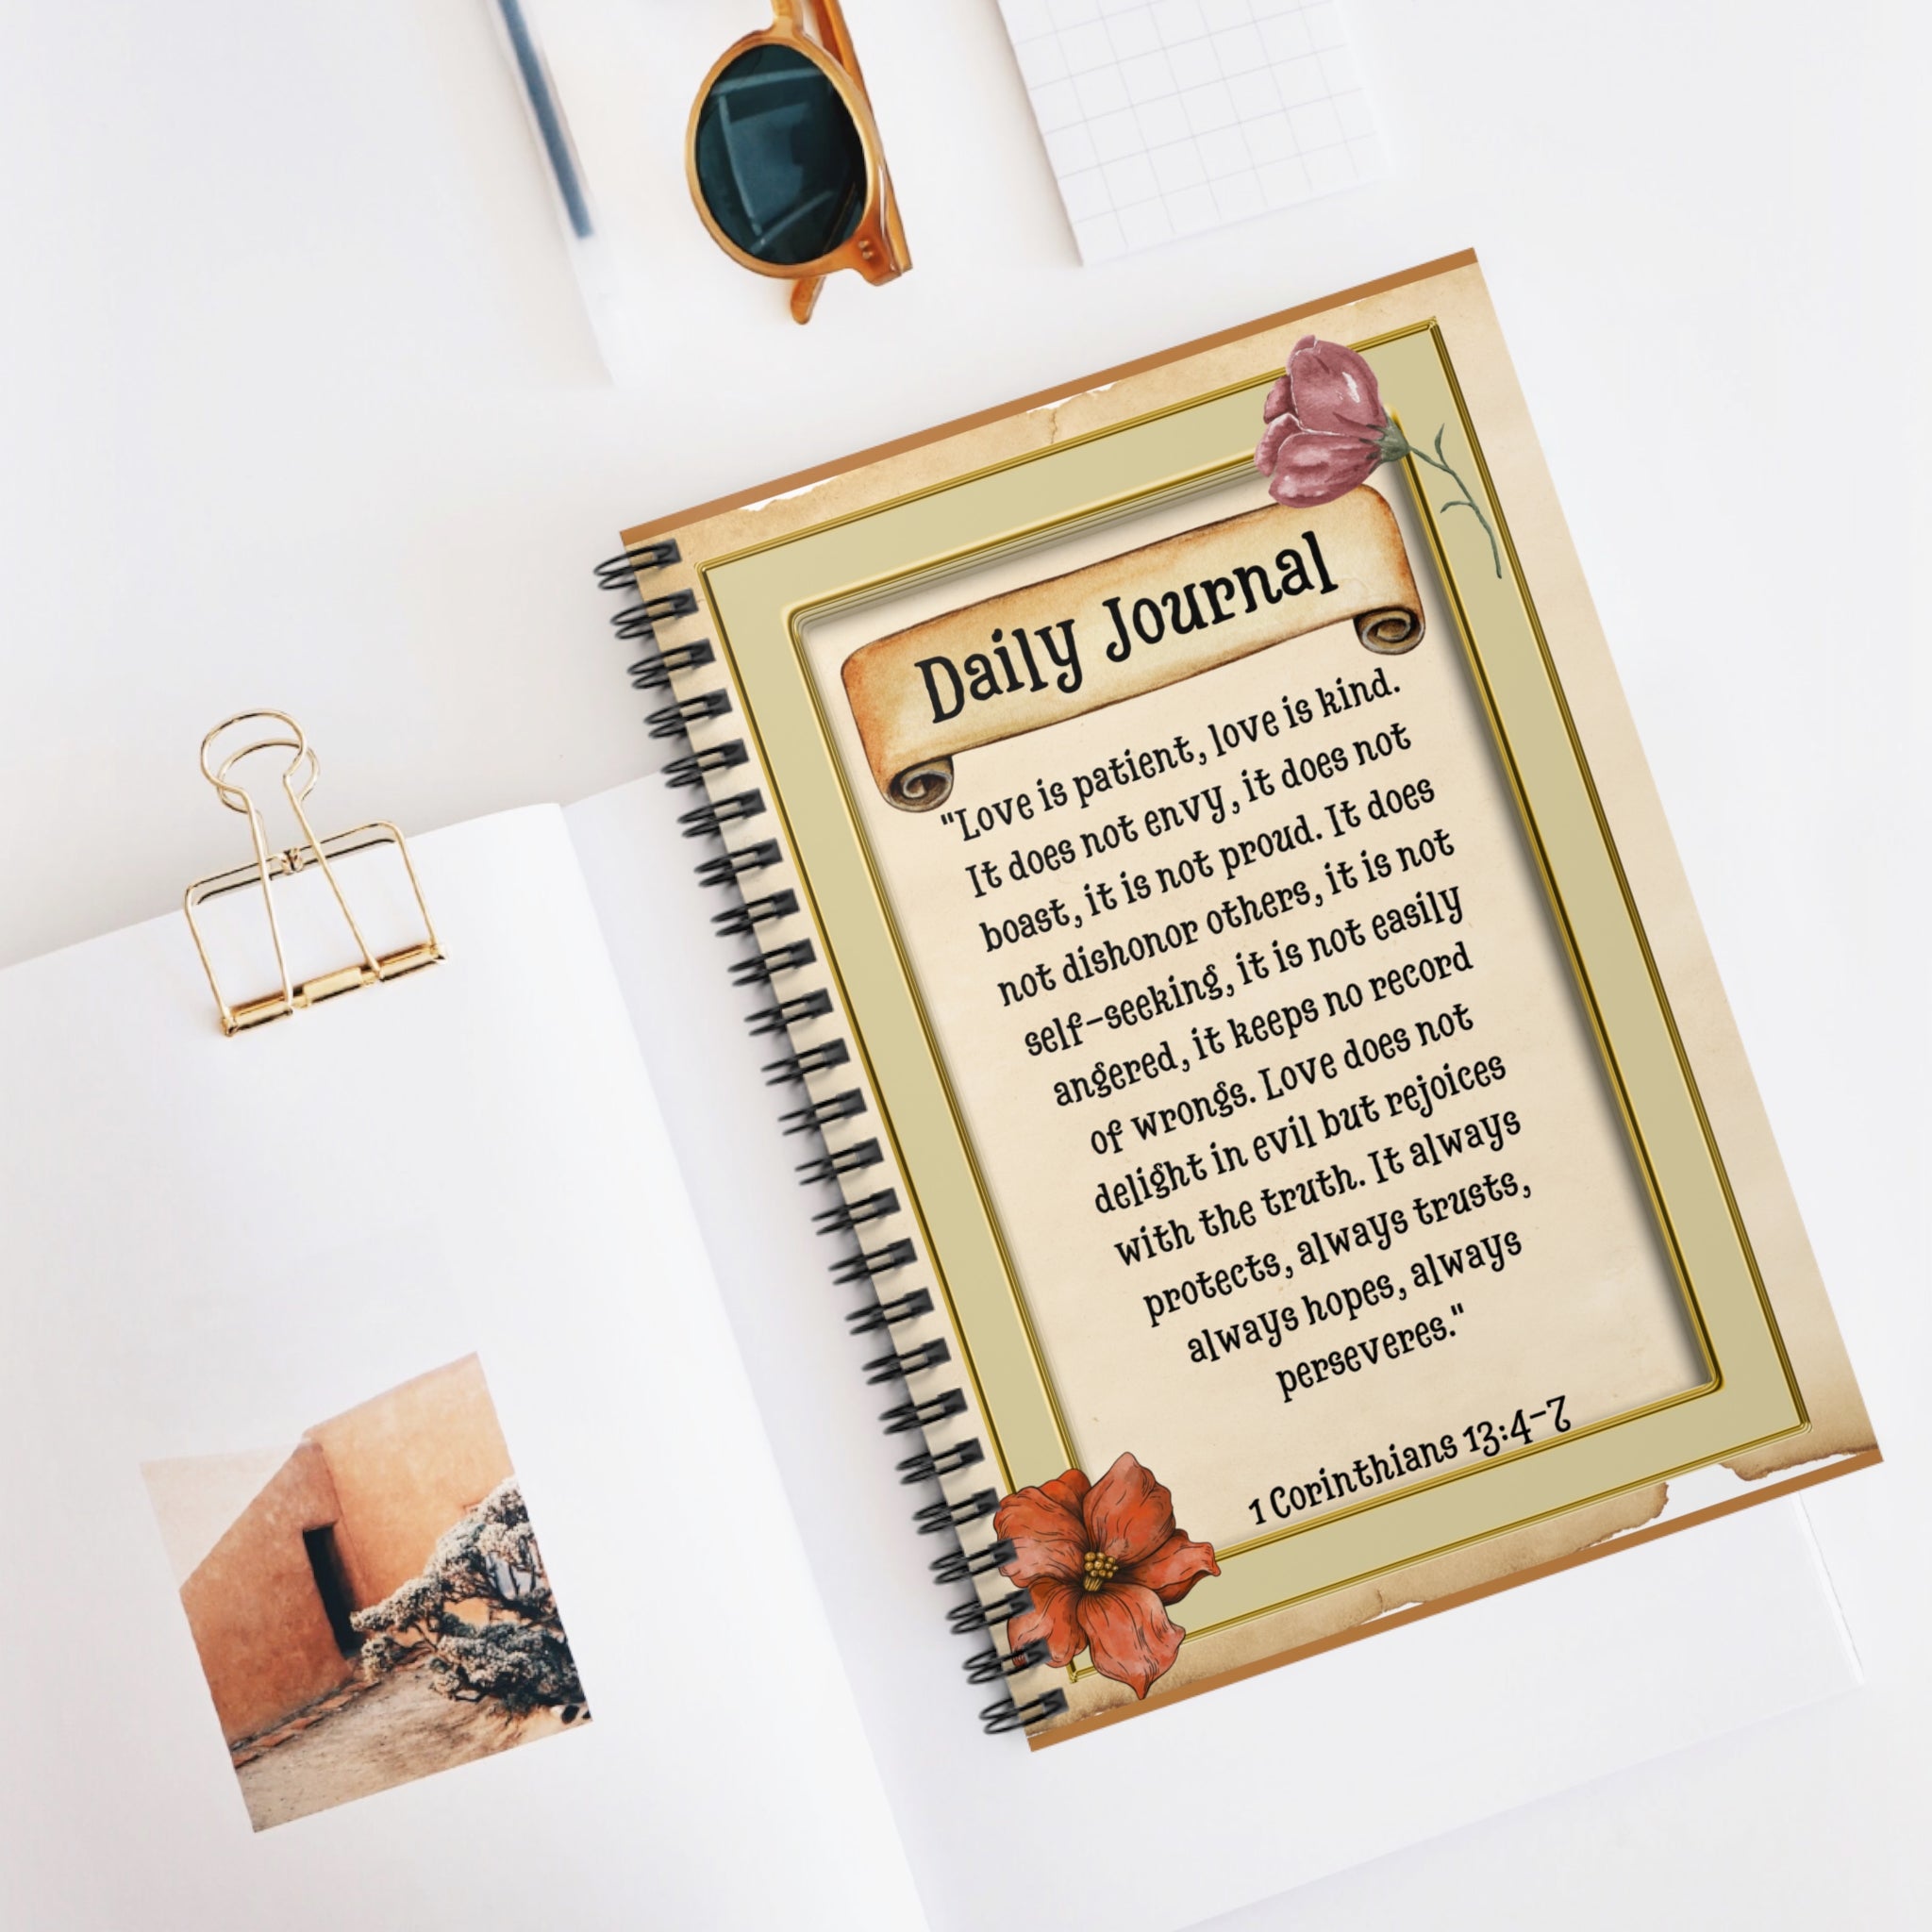 Daily Journal Vintage Design Spiral Notebook - Ruled Line Paper products Krazy Heart Designs Boutique   